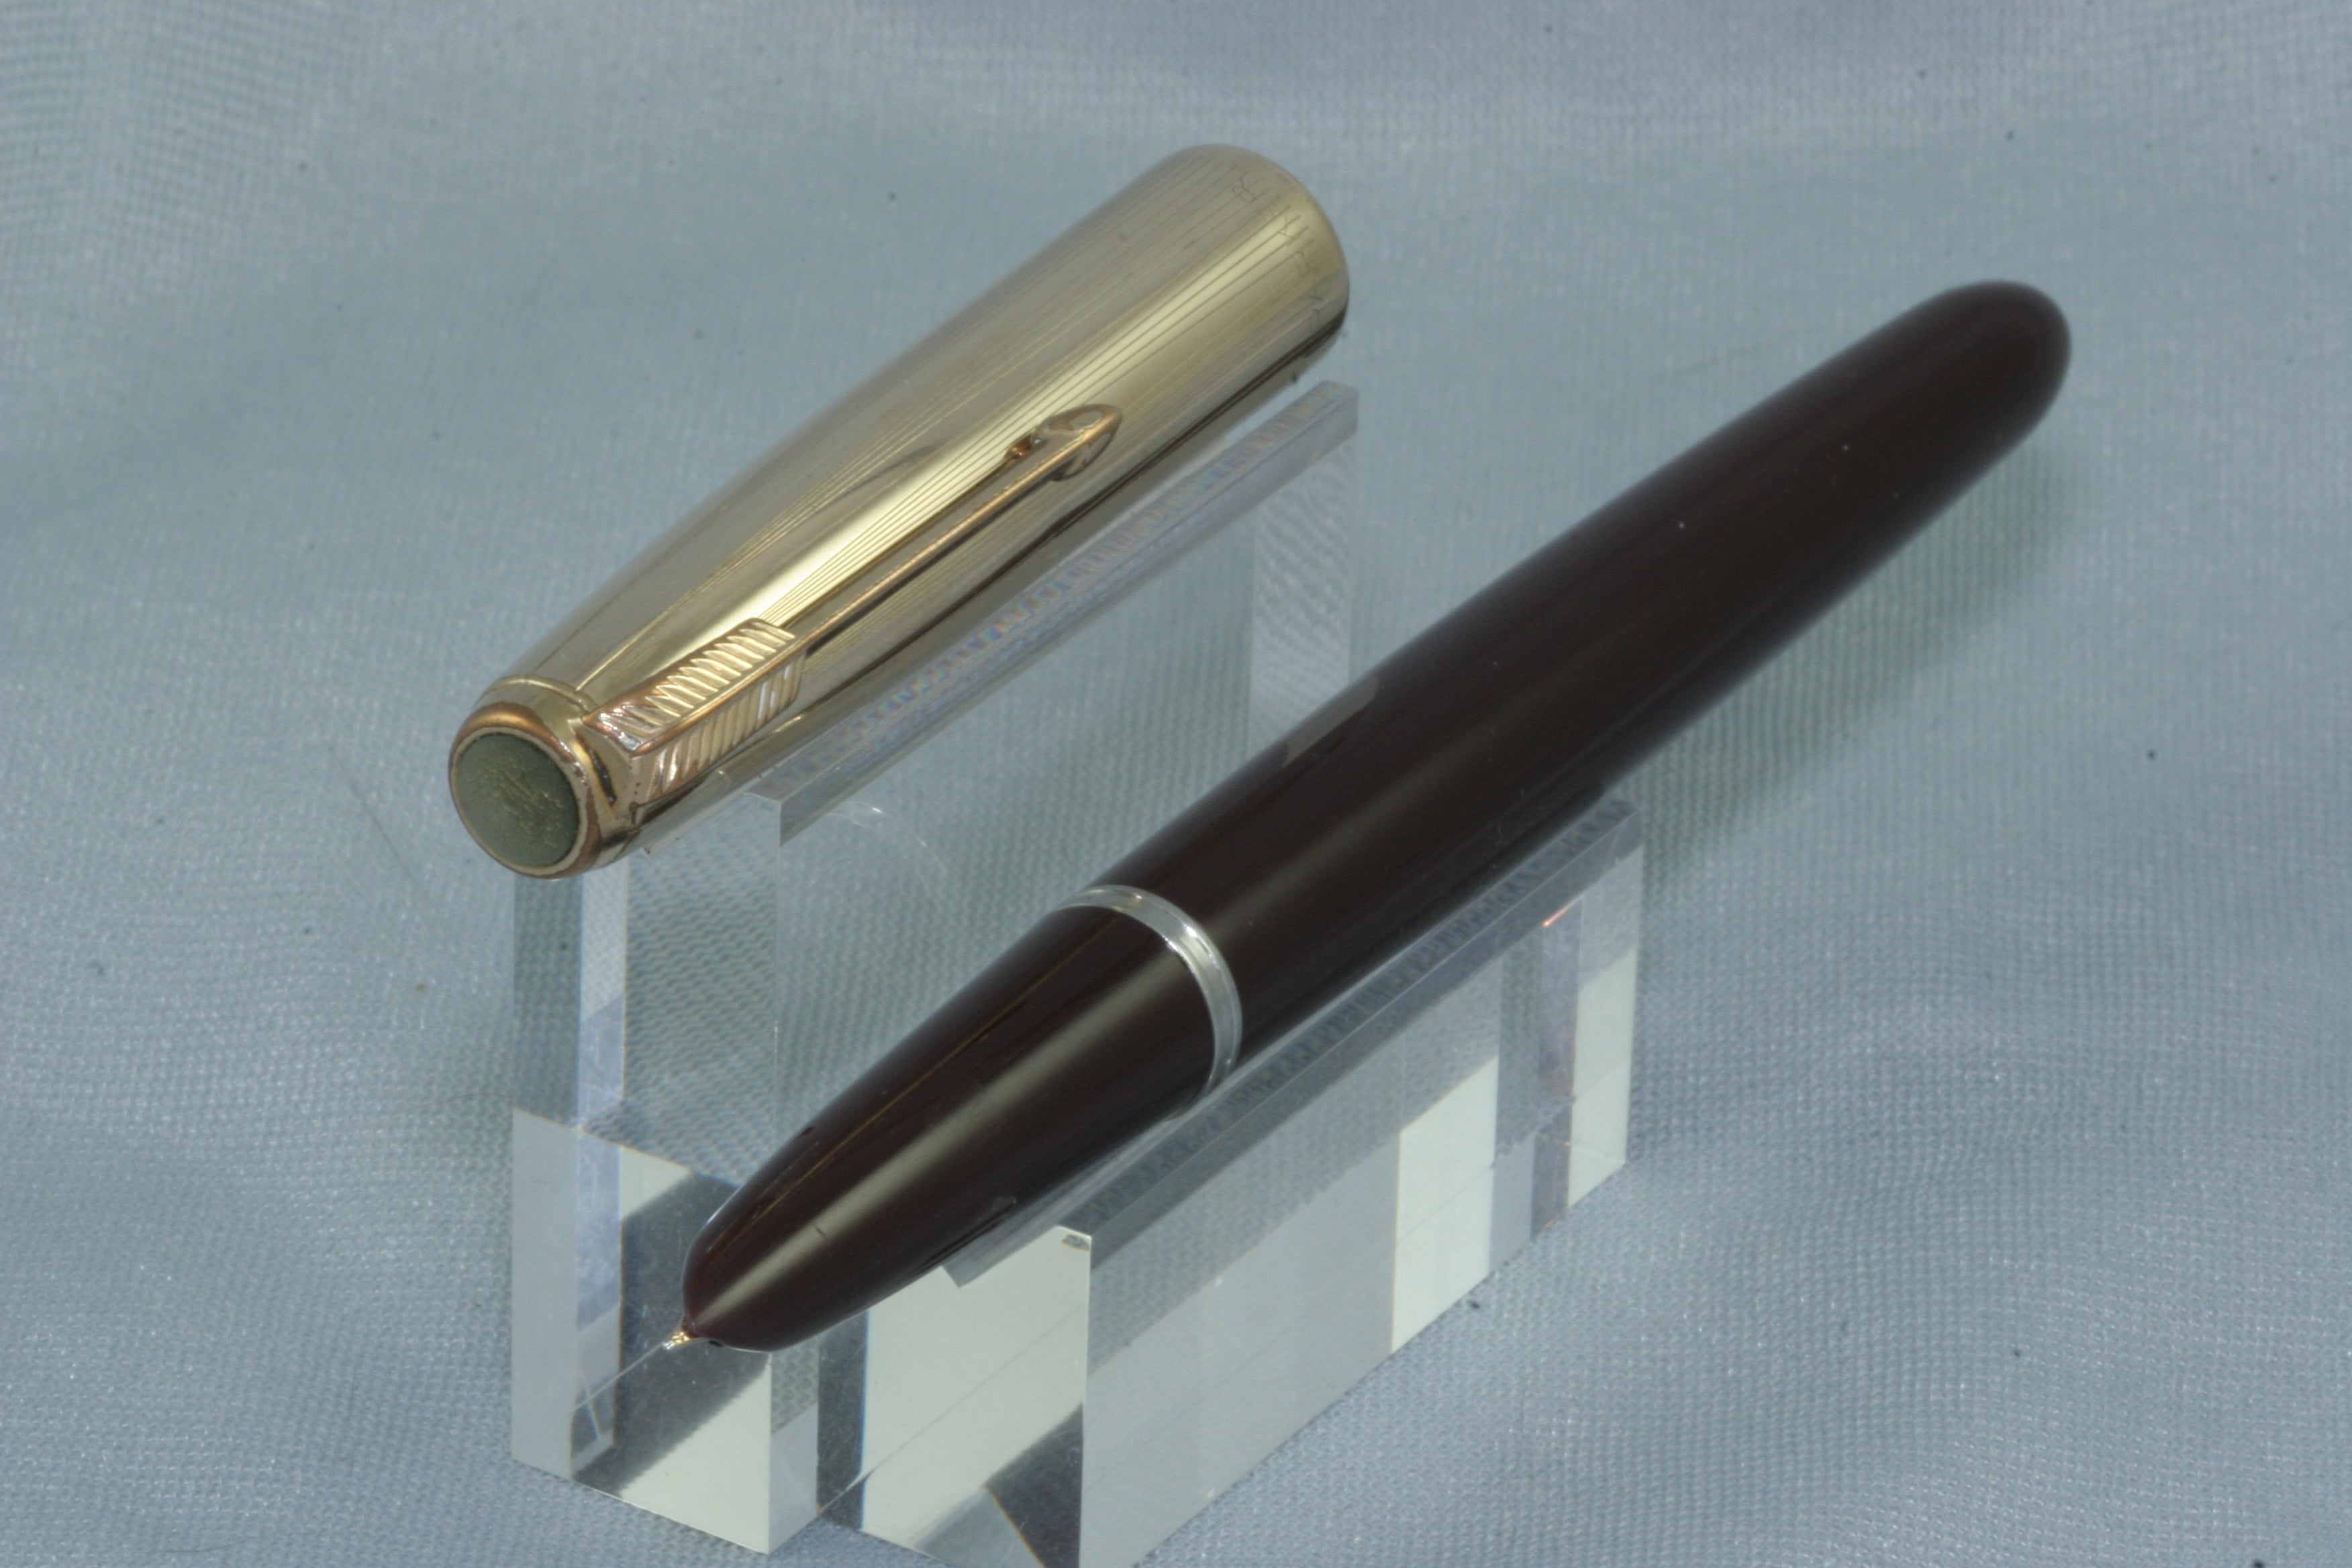 NEW IN STOCK * Parker 51 Aerometric Burgundy - Gold Filled Cap - Restored And Working